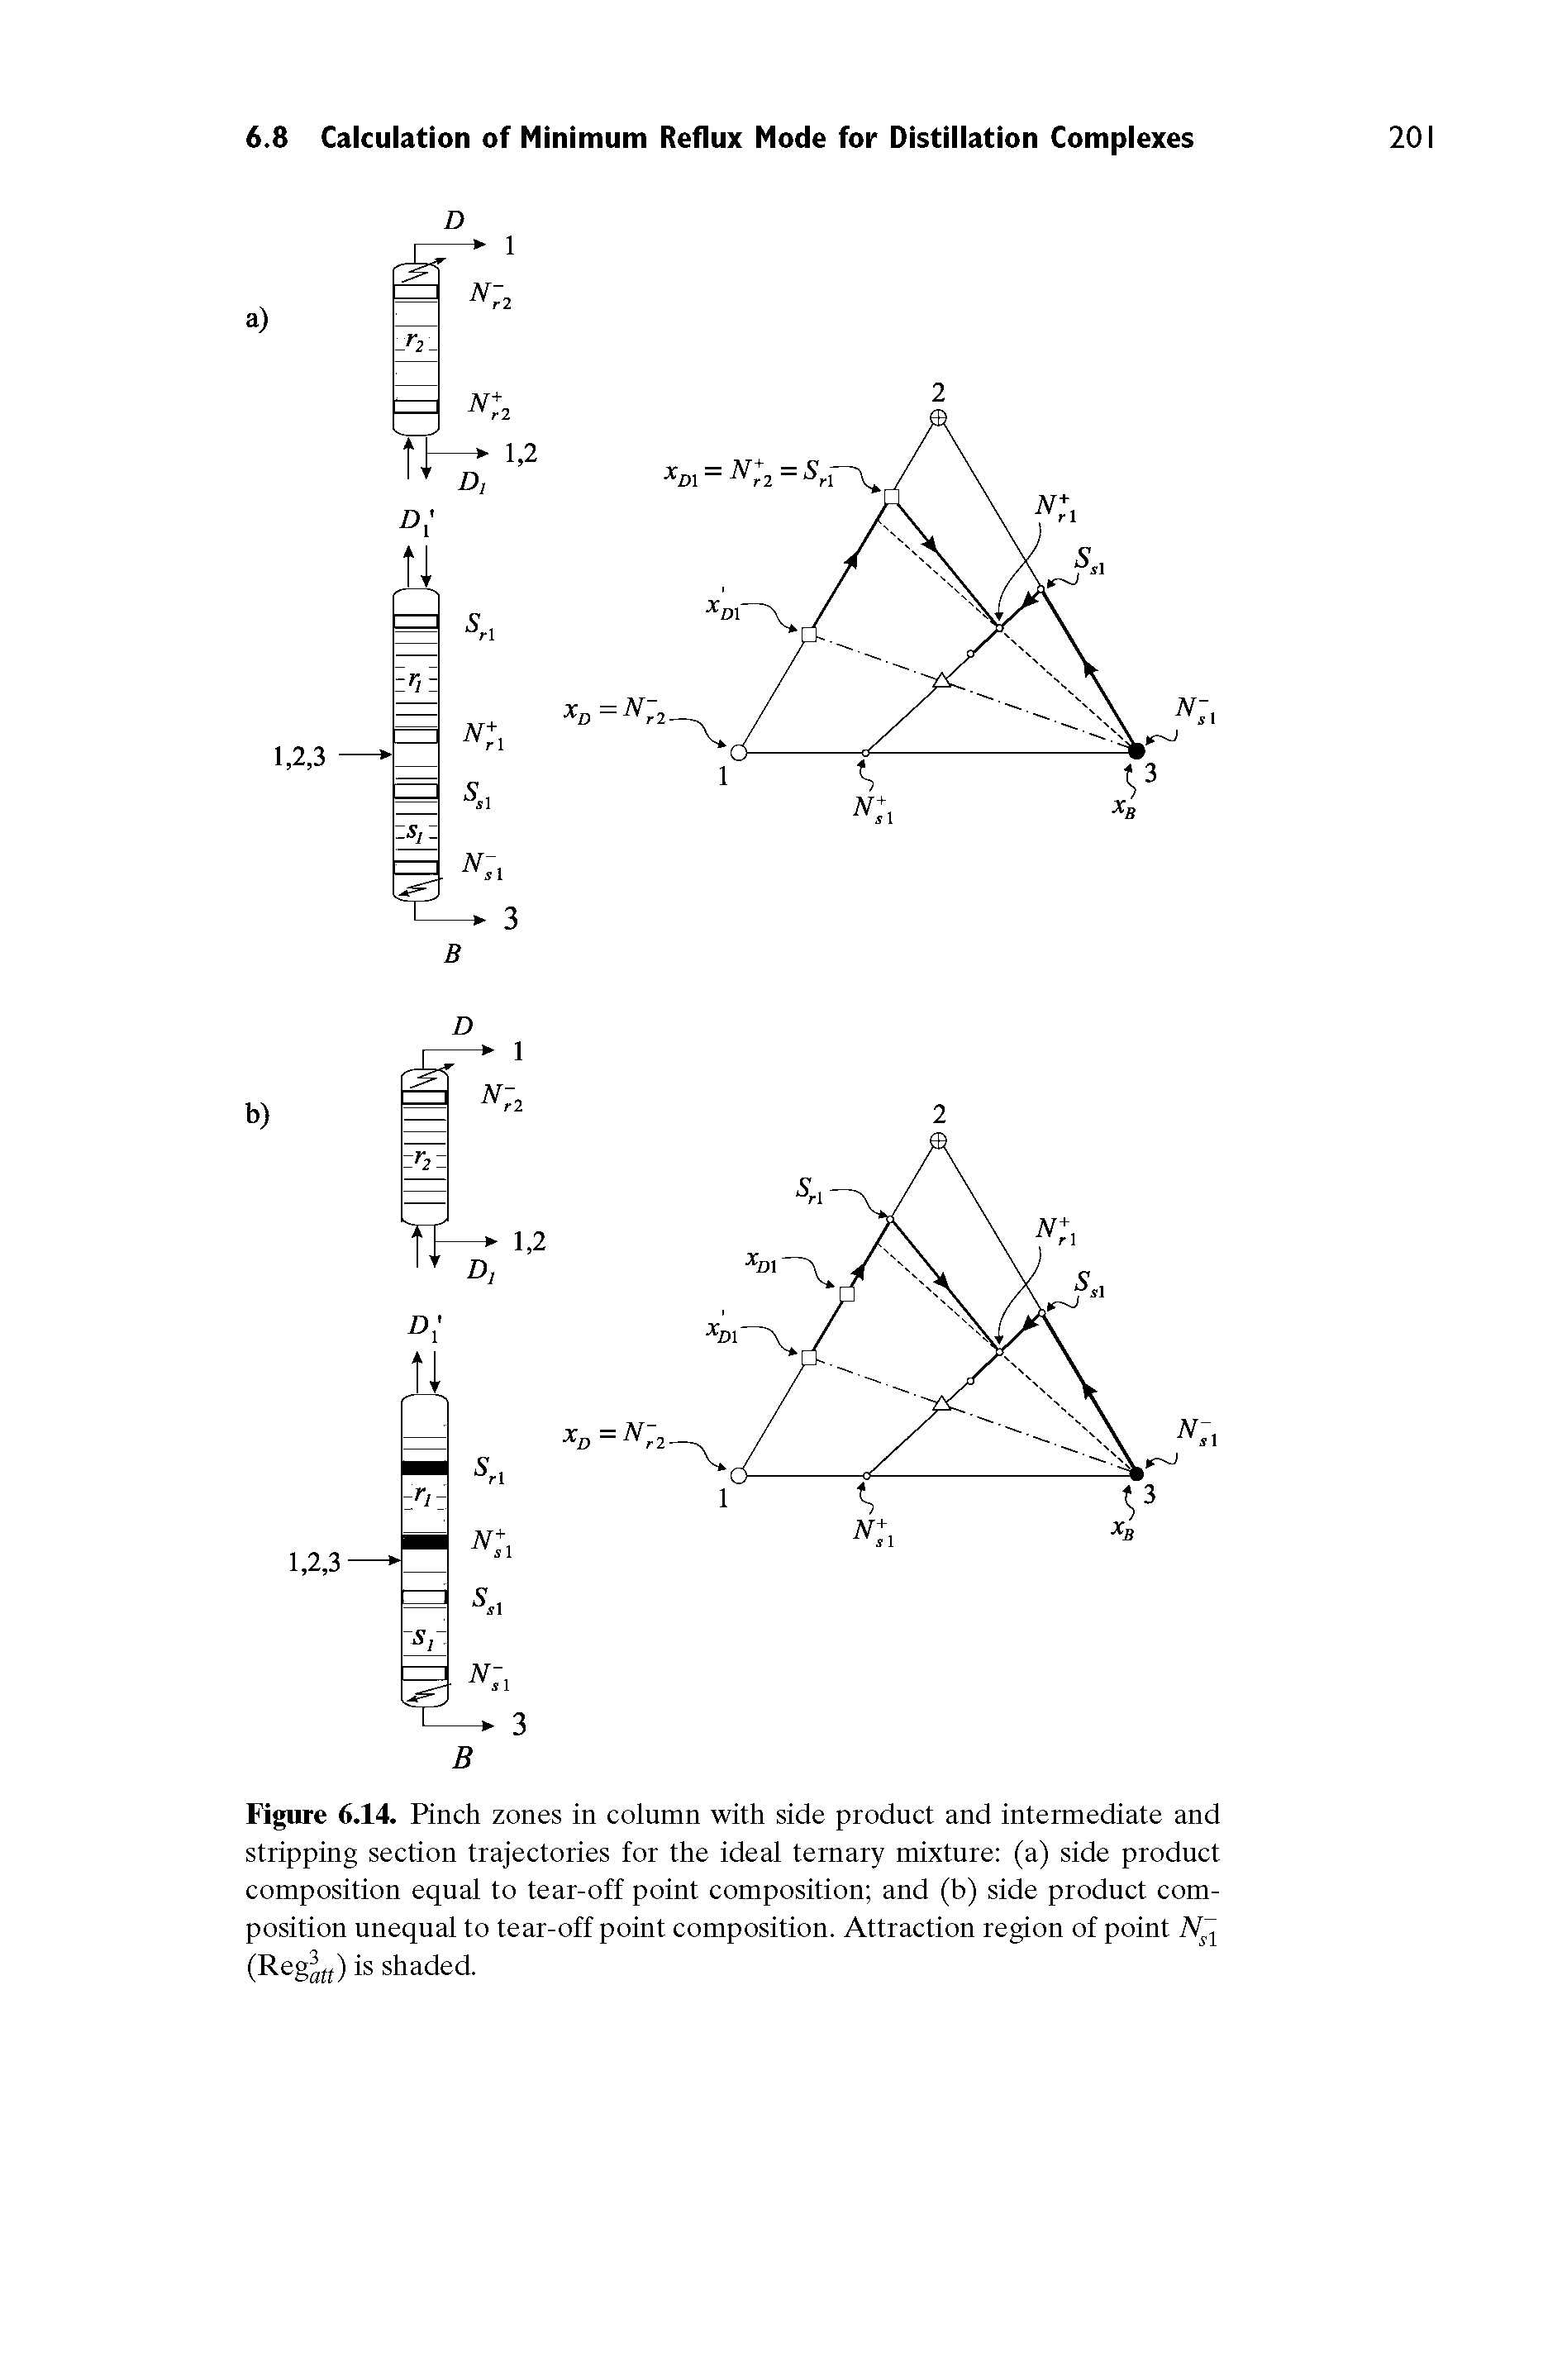 Figure 6.14. Knch zones in column with side product and intermediate and stripping section trajectories for the ideal ternary mixture (a) side product composition equal to tear-off point composition and (b) side product composition unequal to tear-off point composition. Attraction region of point (Reg ft) is shaded.